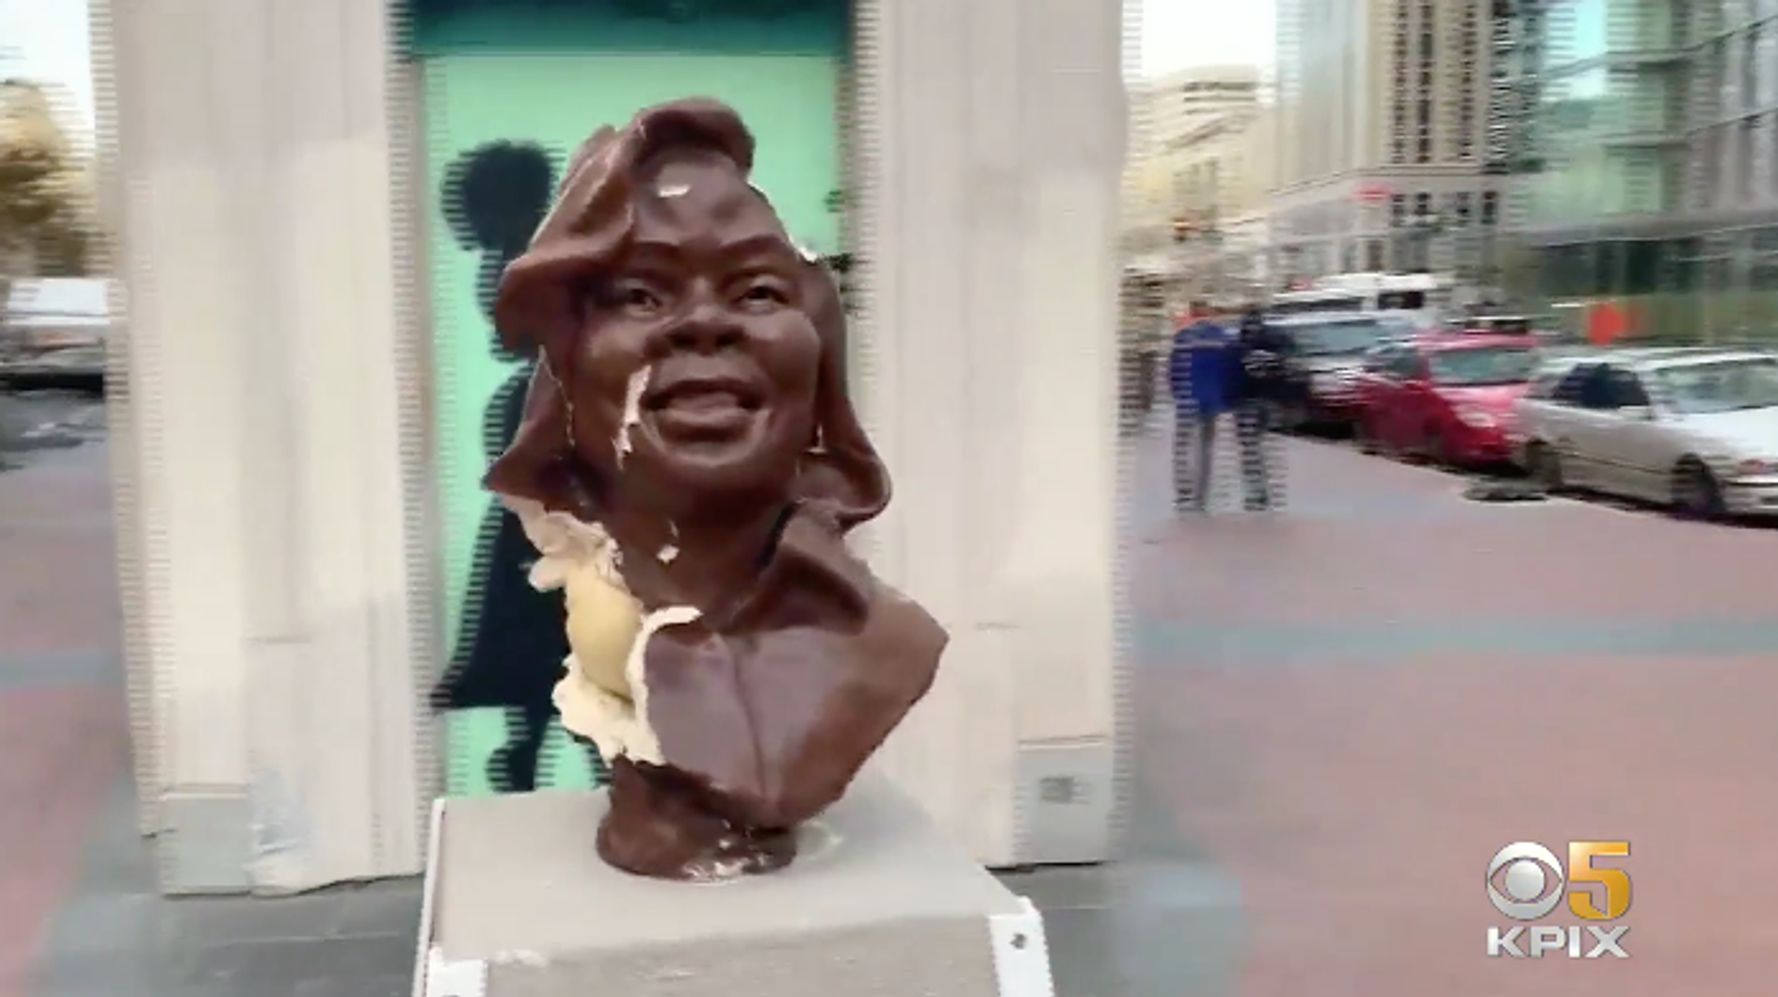 Was a Breonna Taylor Statue Smashed in Oakland?